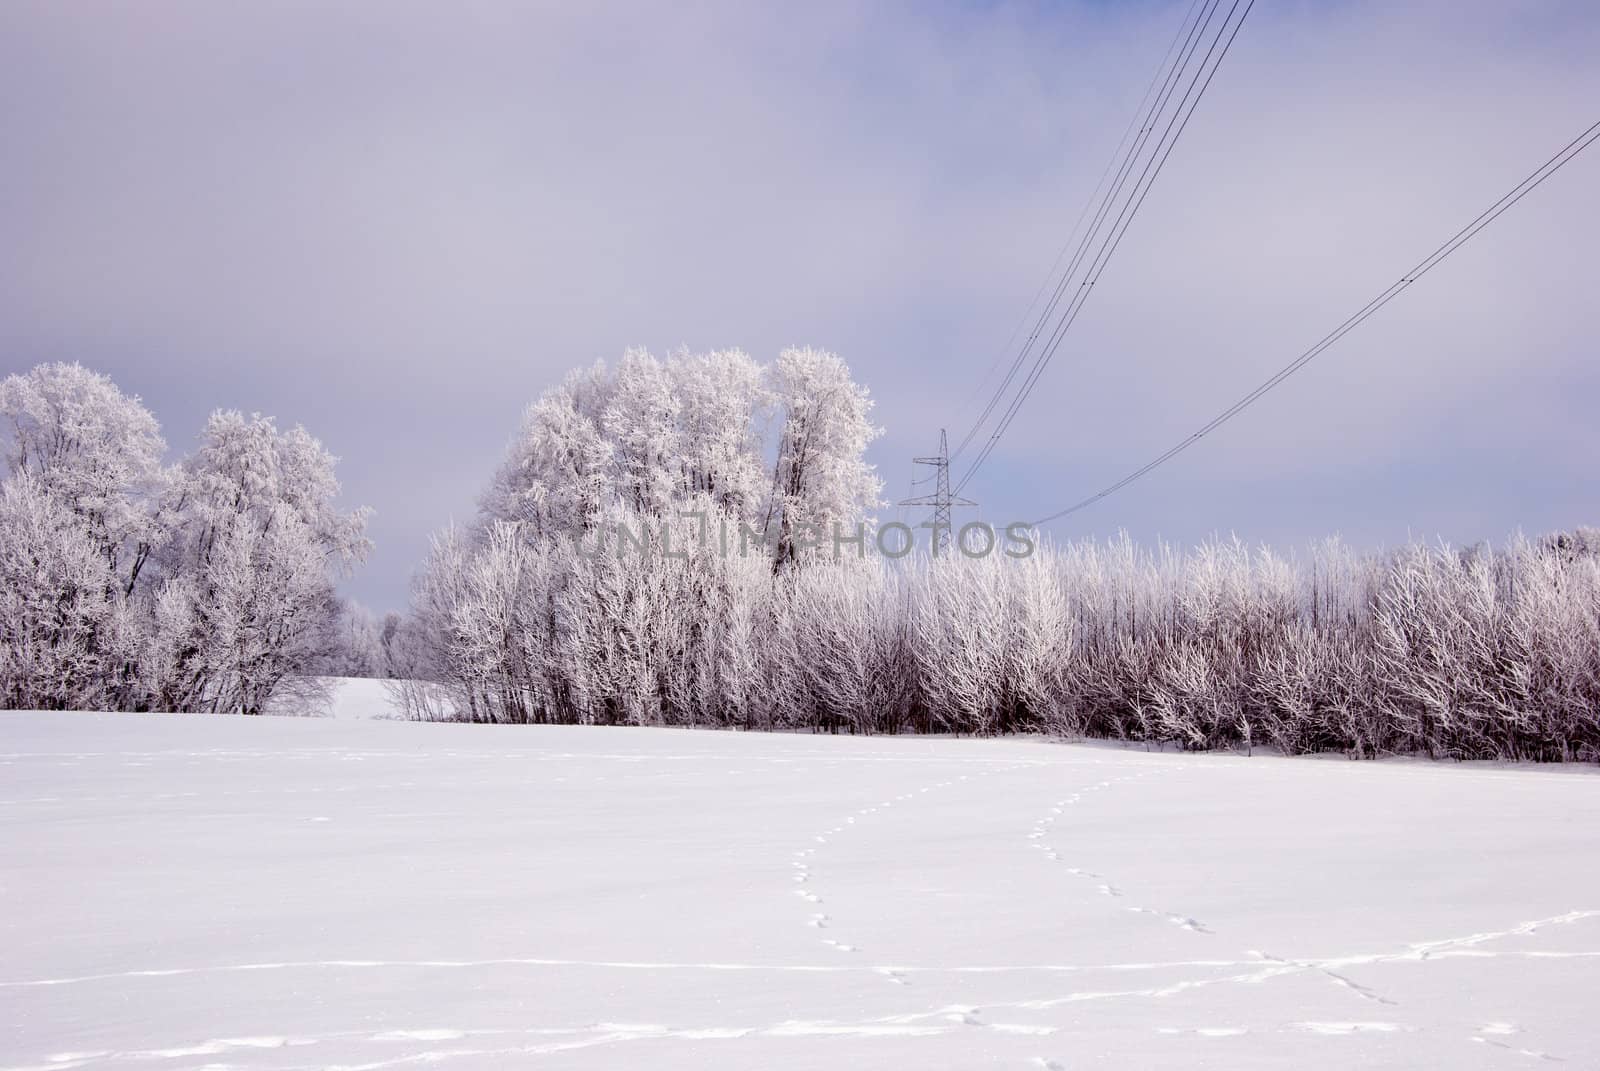 Hoarfrost on the trees and high voltage electricity wires.